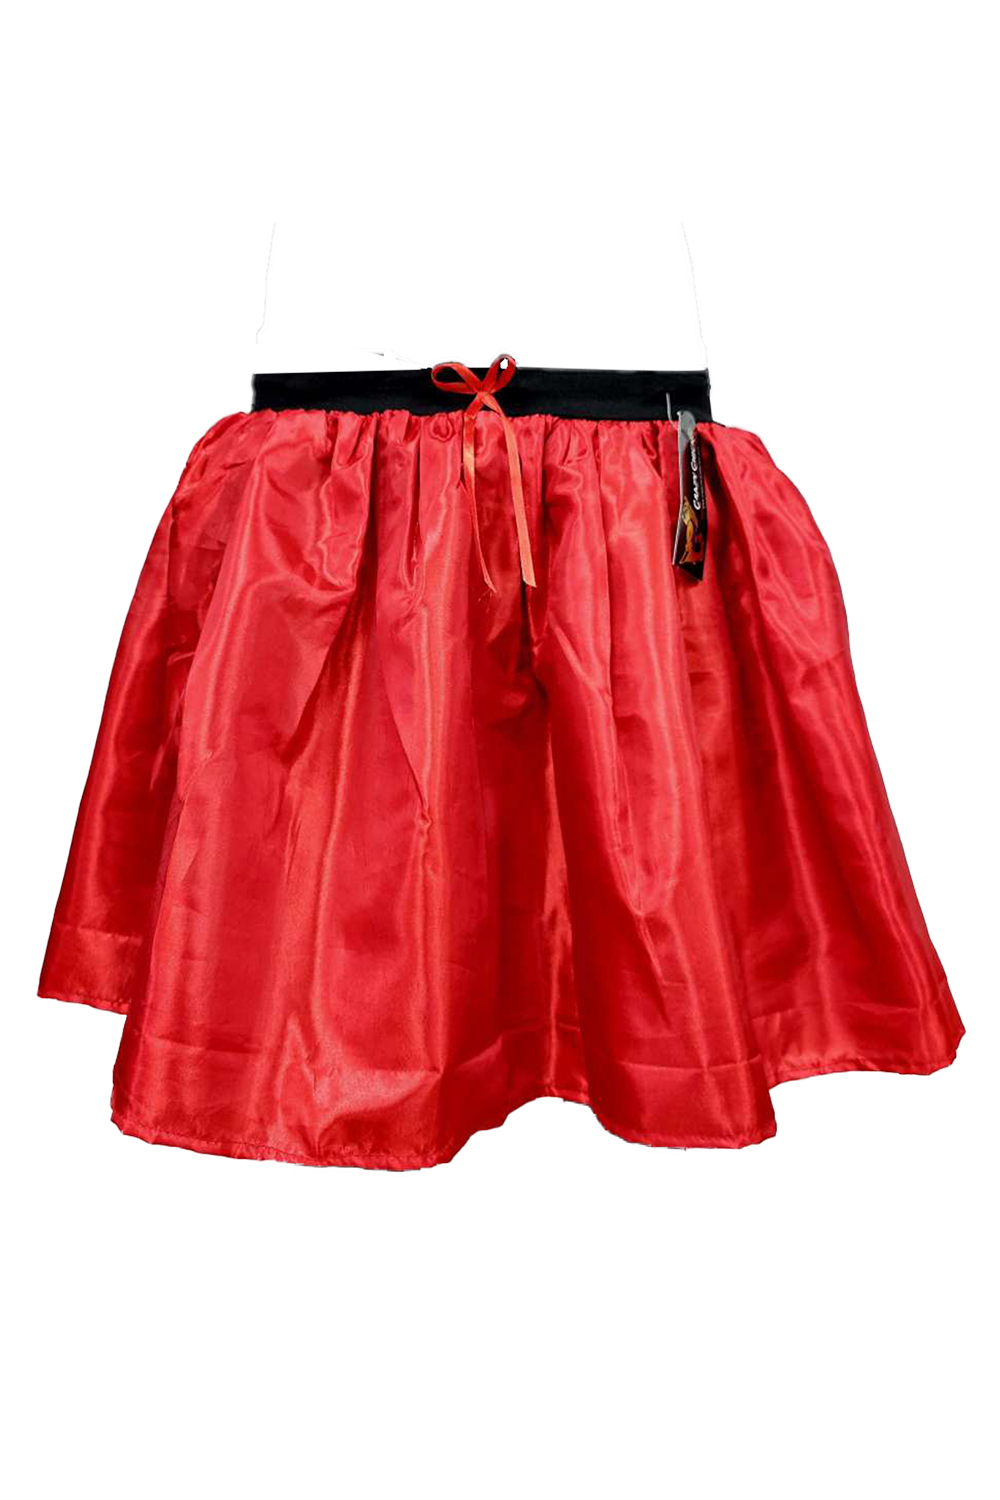 Crazy Chick Adult 3 Layers Red Satin Tutu Skirt (Approx 18 Inches Long)